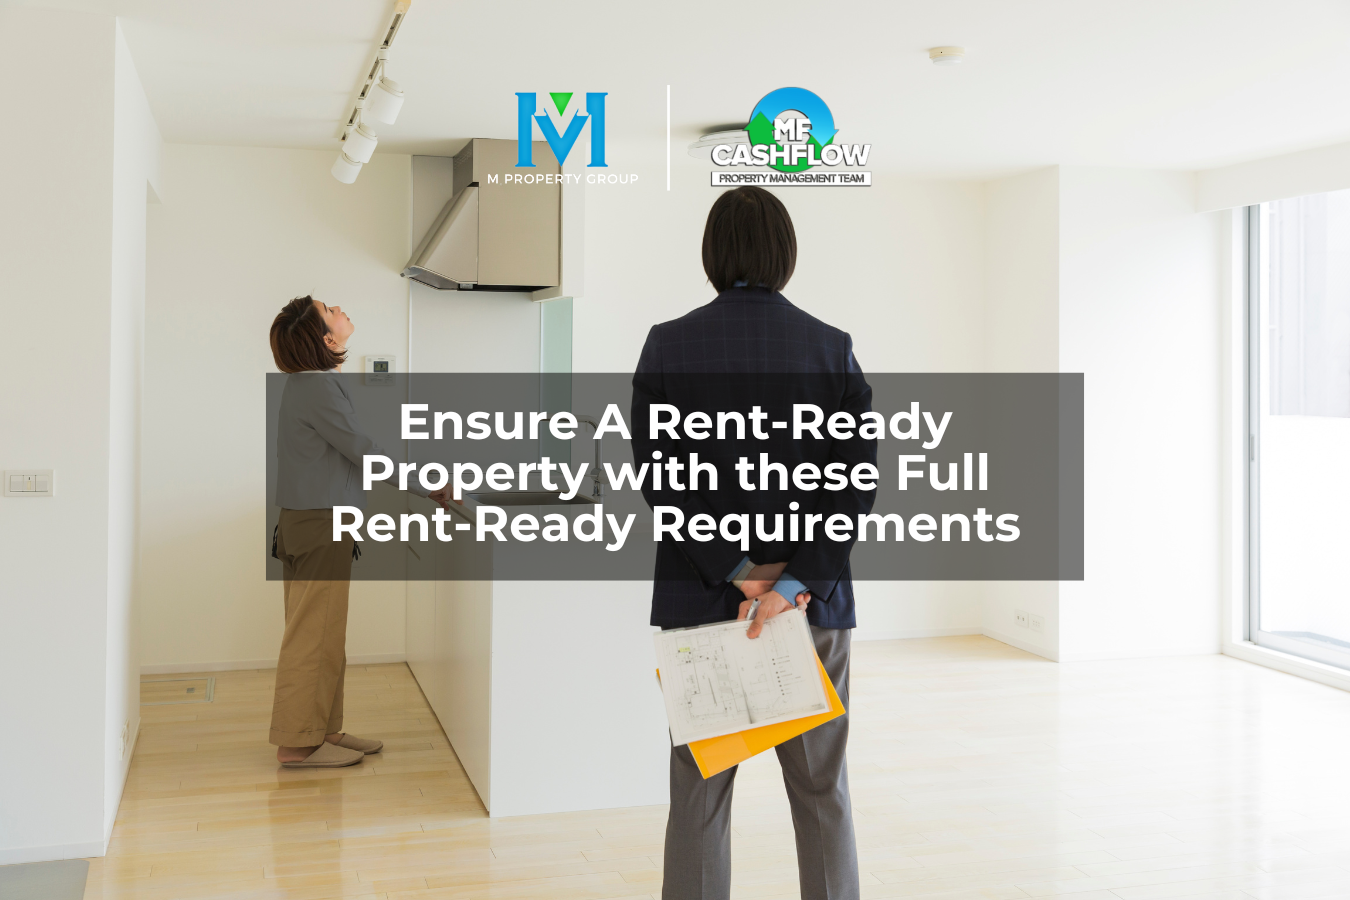 Ensure A Rent-Ready Property with these Full Rent-Ready Requirements